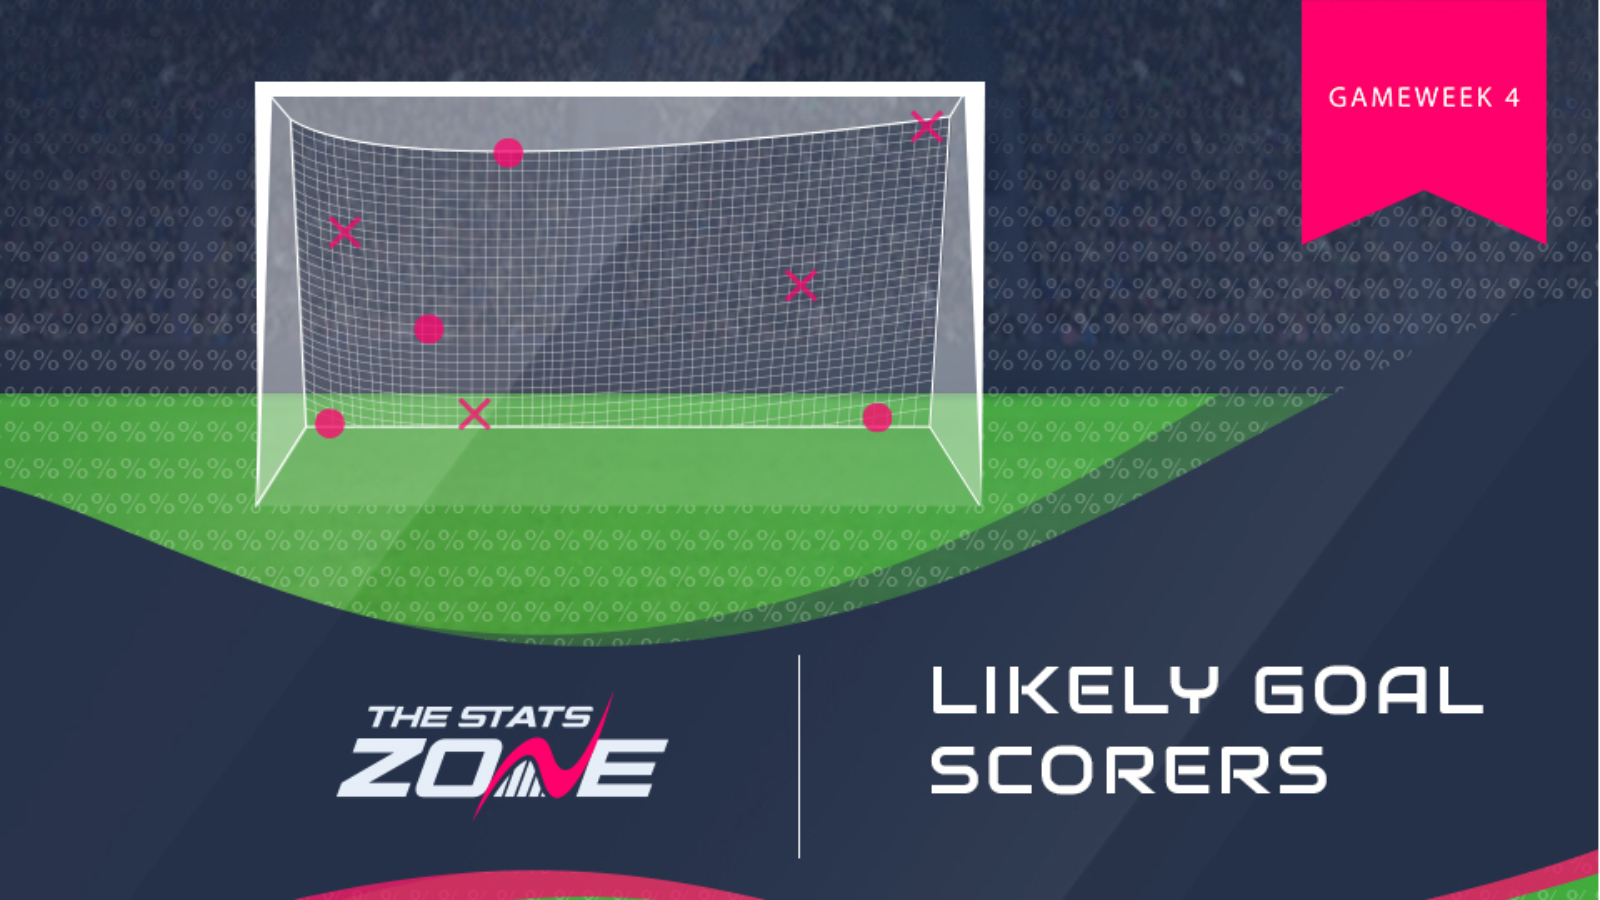 FPL Gameweek 4 – likely goalscorers - The Stats Zone